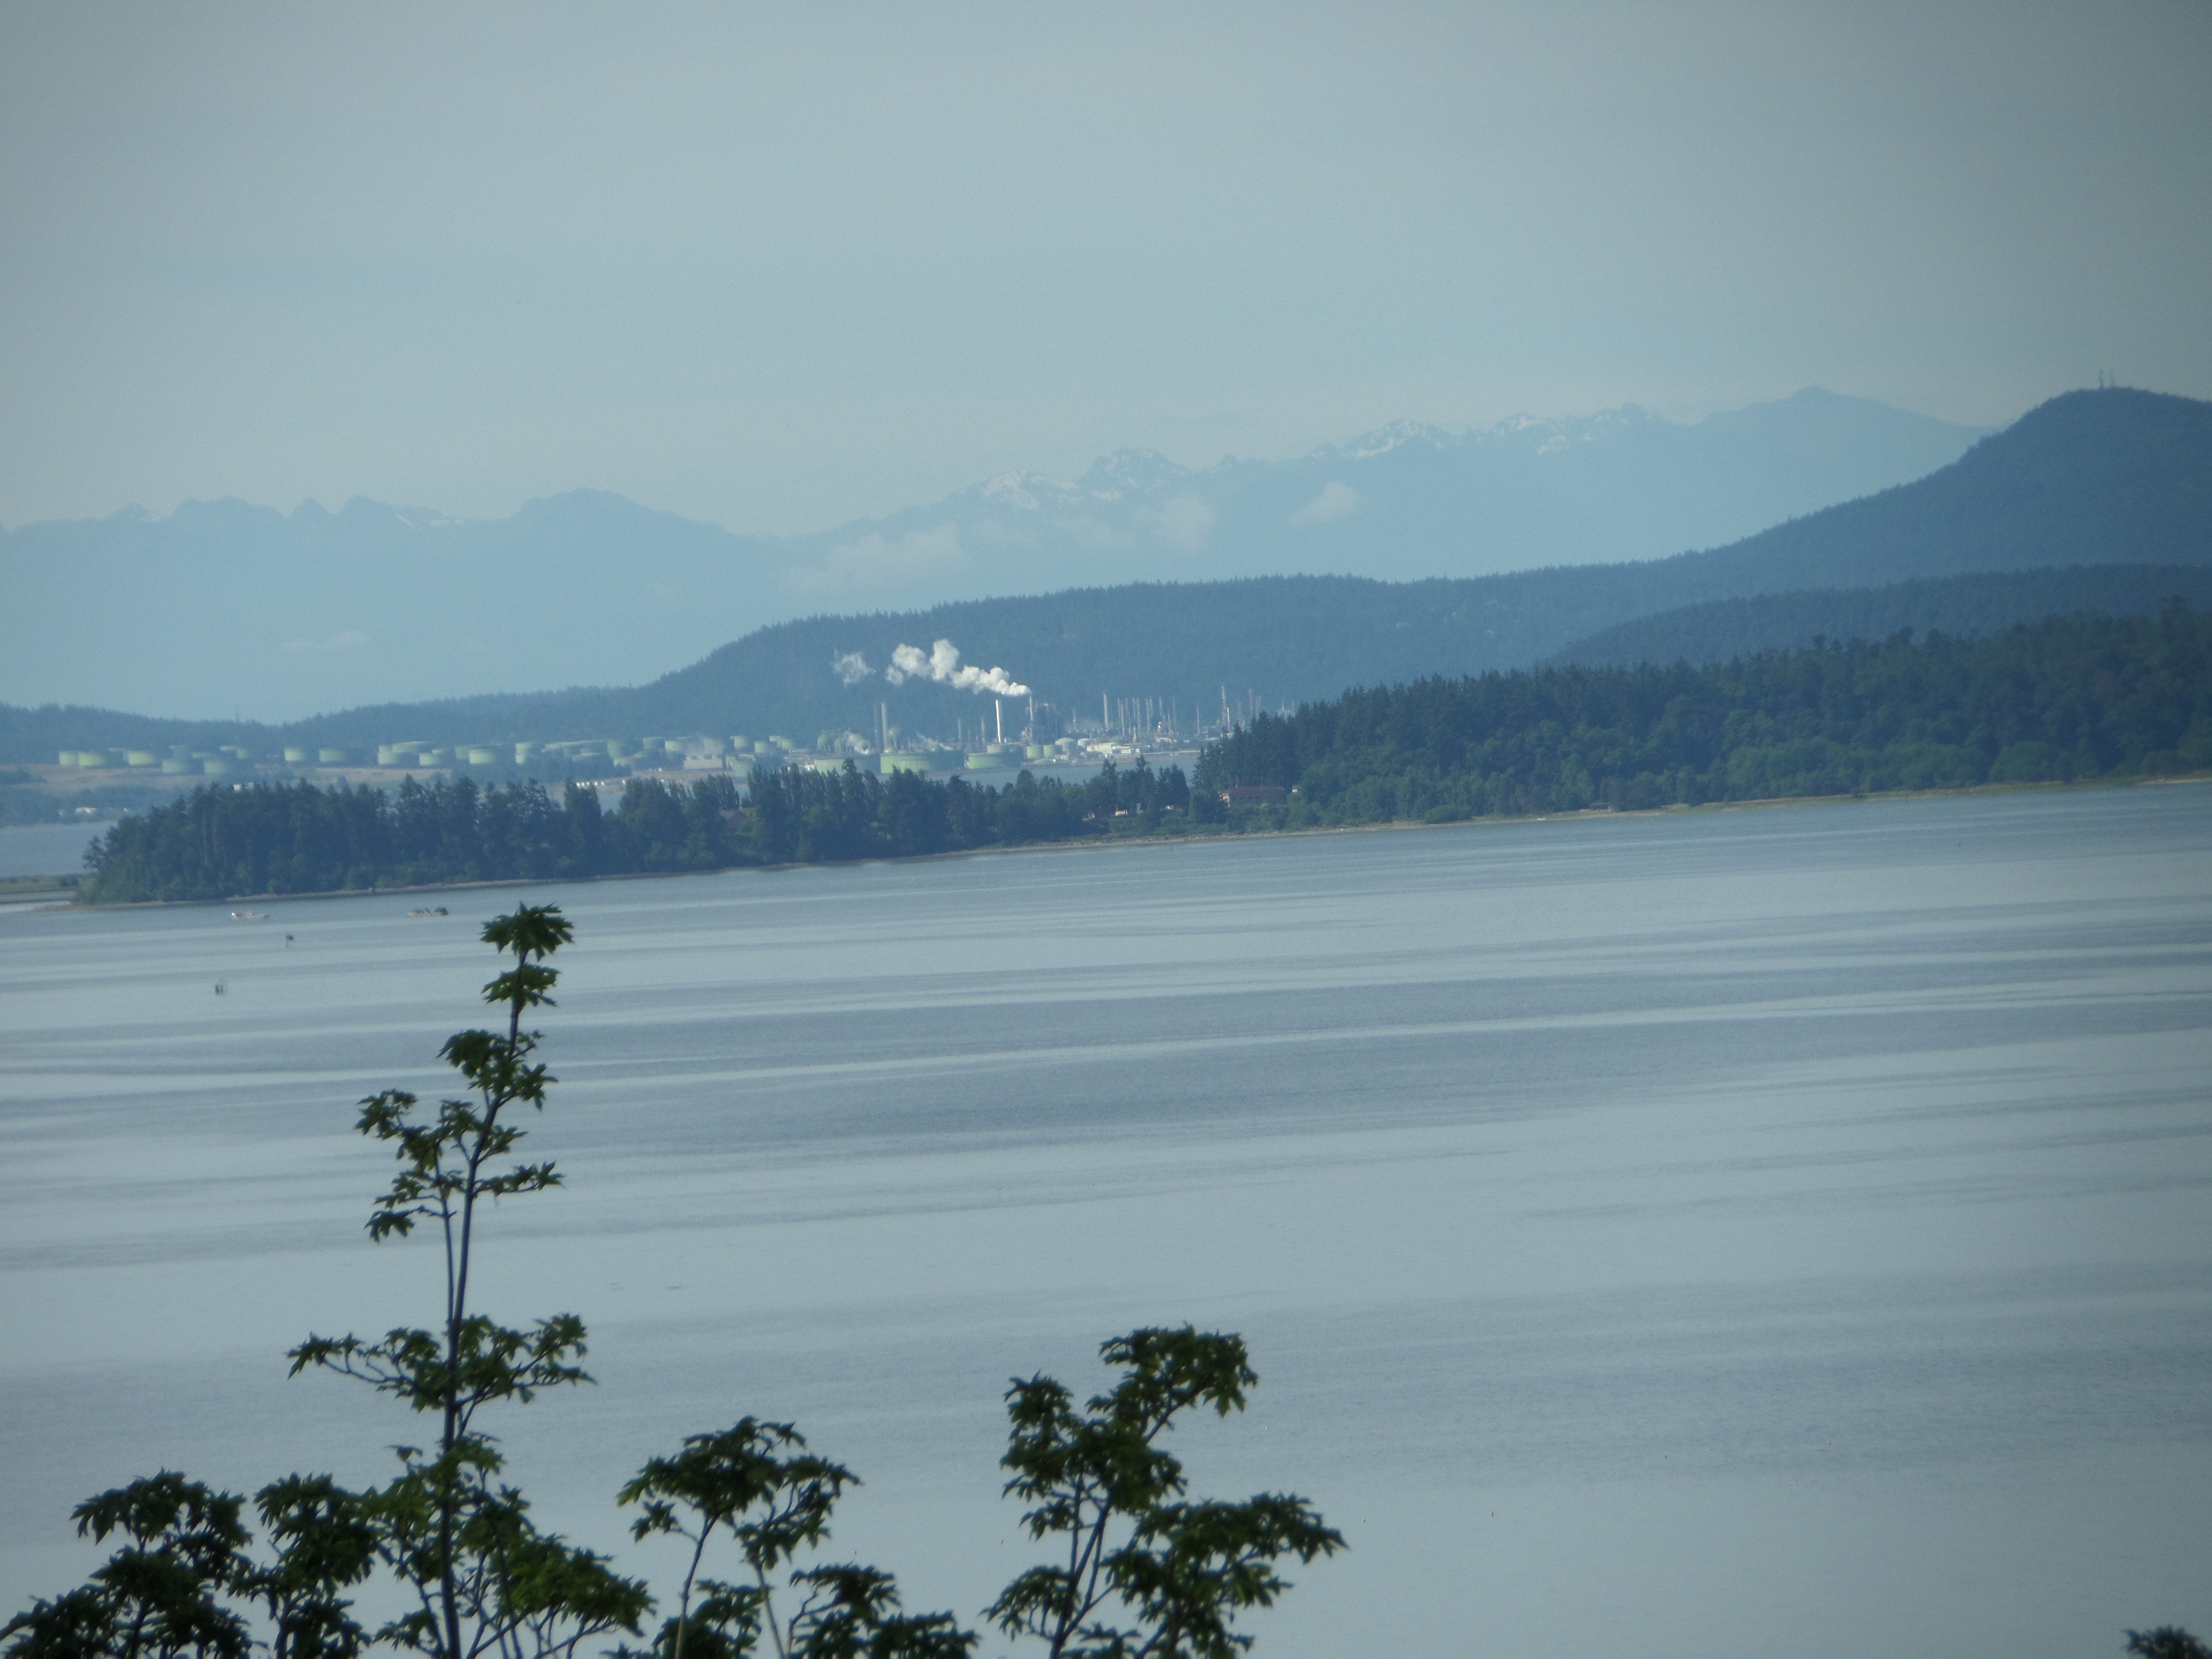 View from Chuckanut Drive